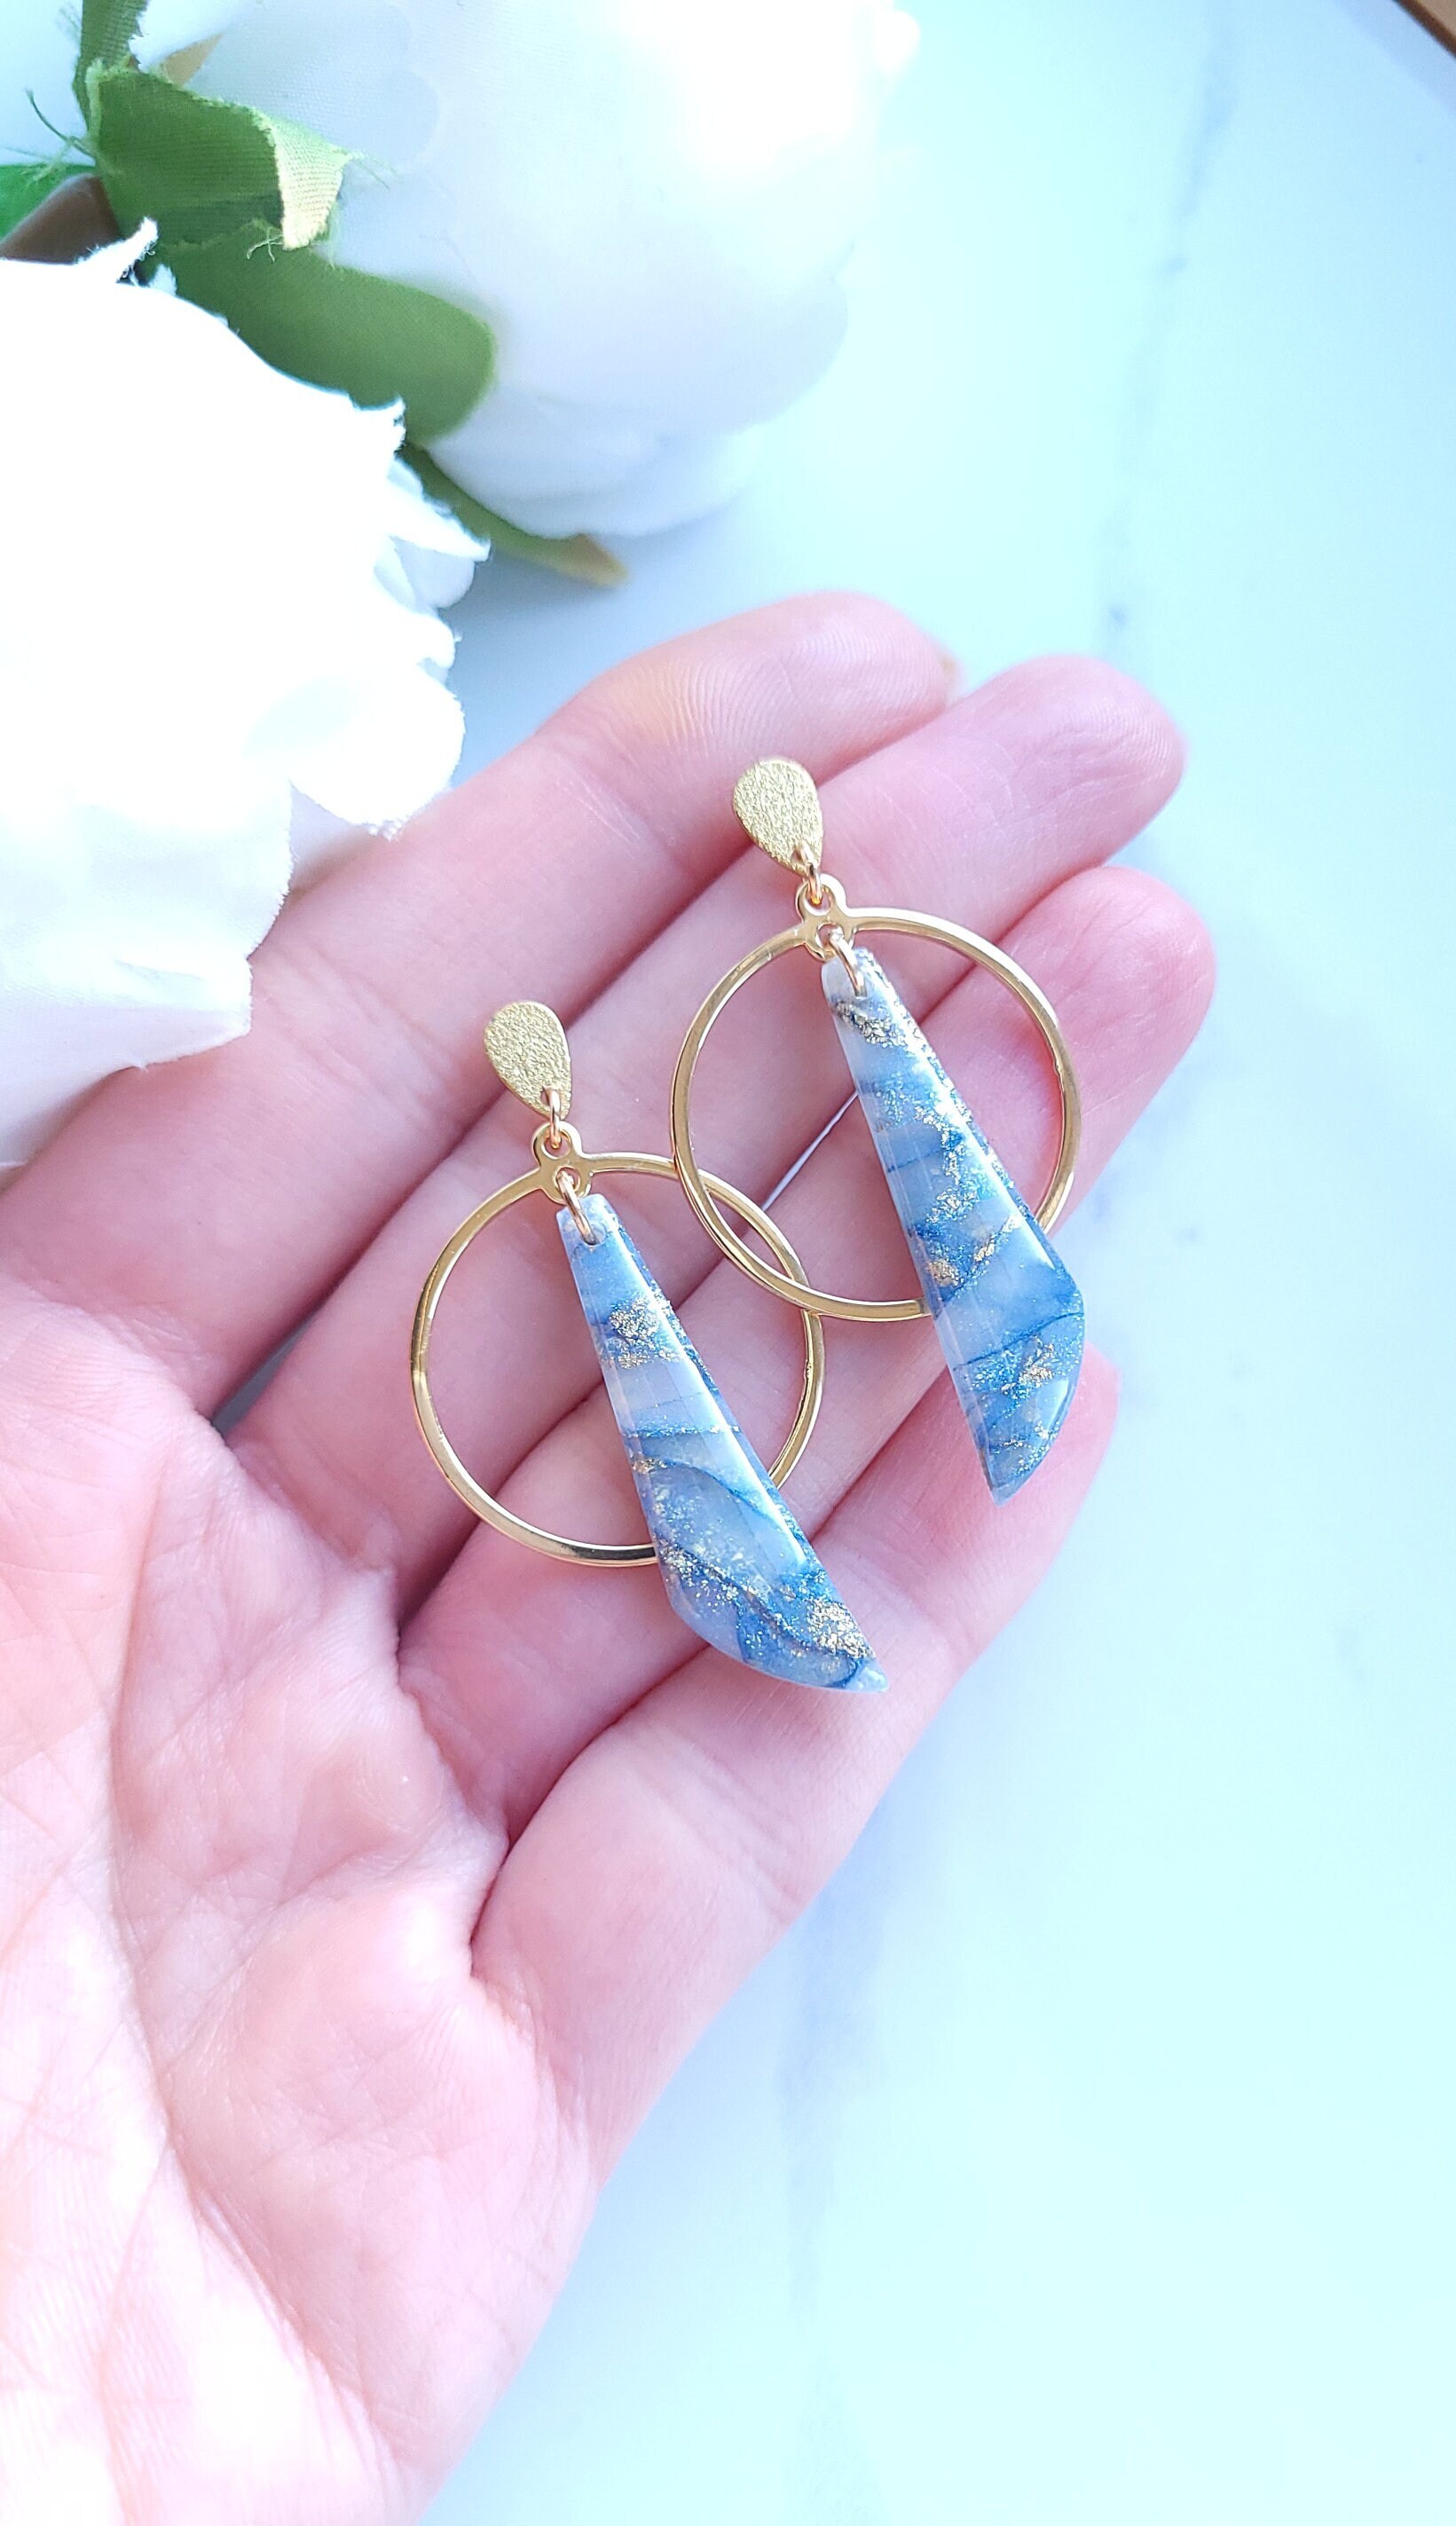 Light Blue & Gold Marble Translucent Earrings | Handmade Polymer Clay Statement Dangle